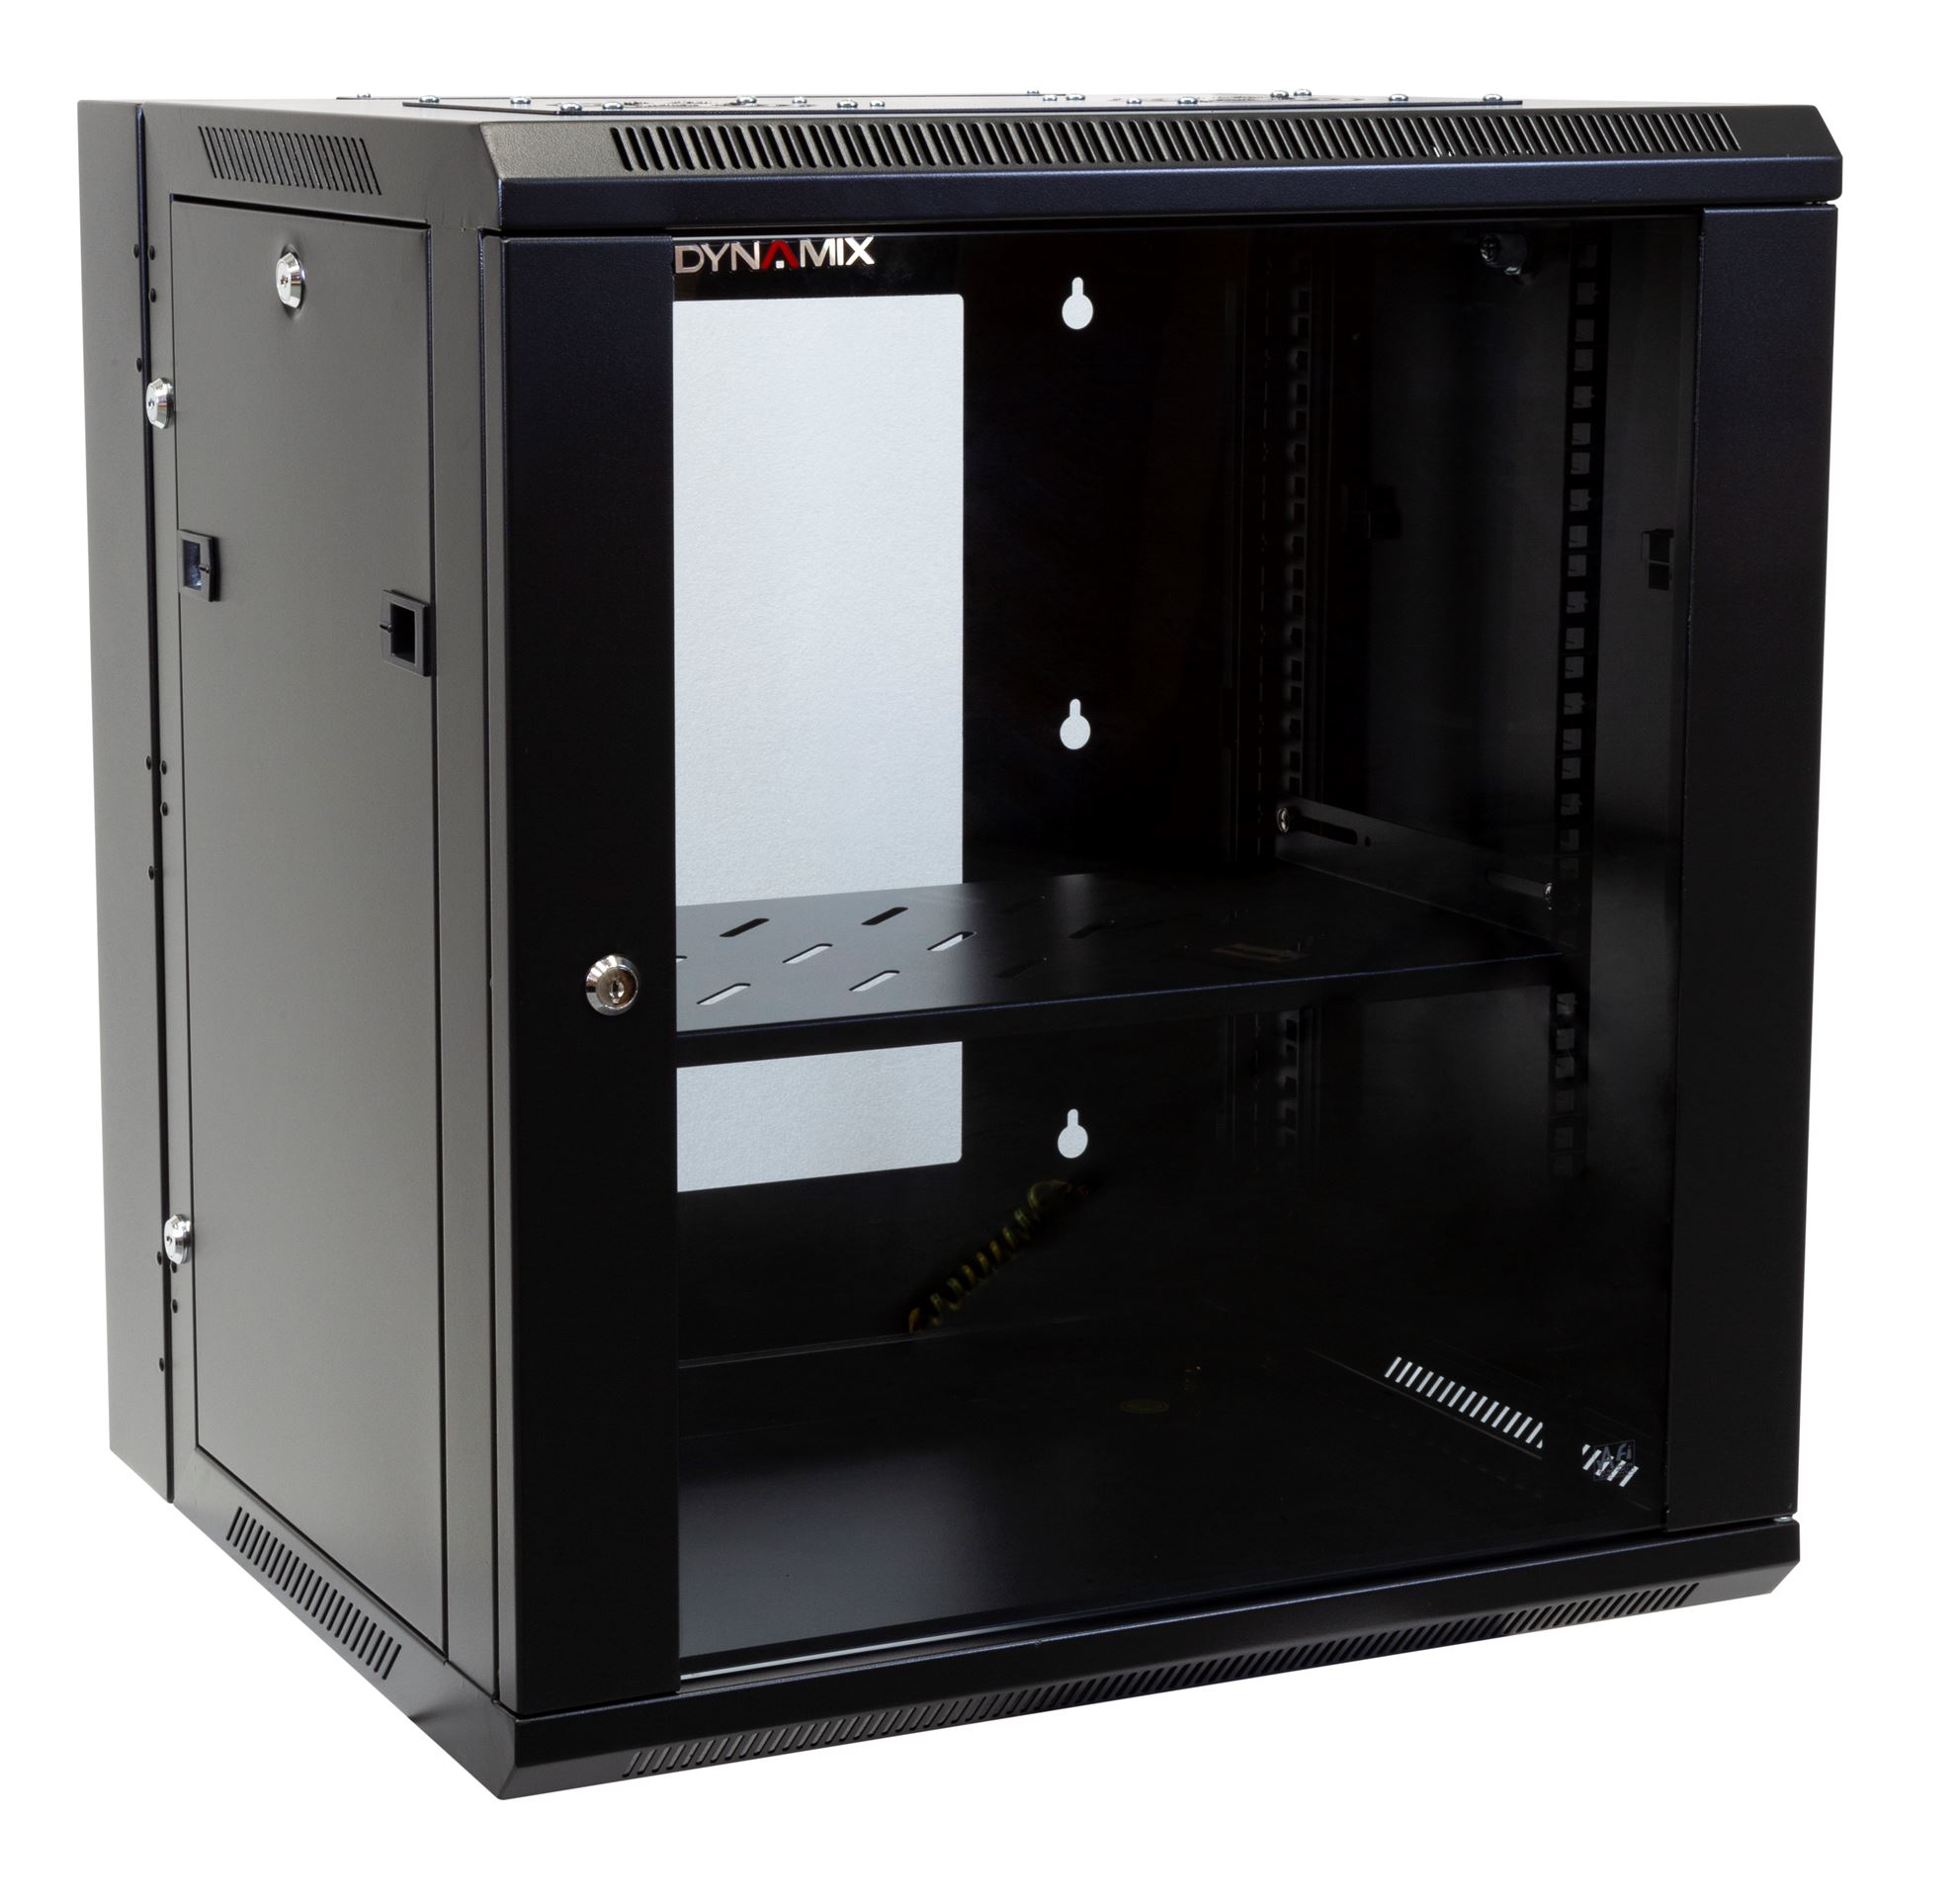 12RU 600mm Deep Universal Swing Wall Mount Cabinet. Removable Backmount (600 x 600 x 635mm)Includes 1x Fixed Shelf, 10x Cage Nuts, Removable Side Panels.